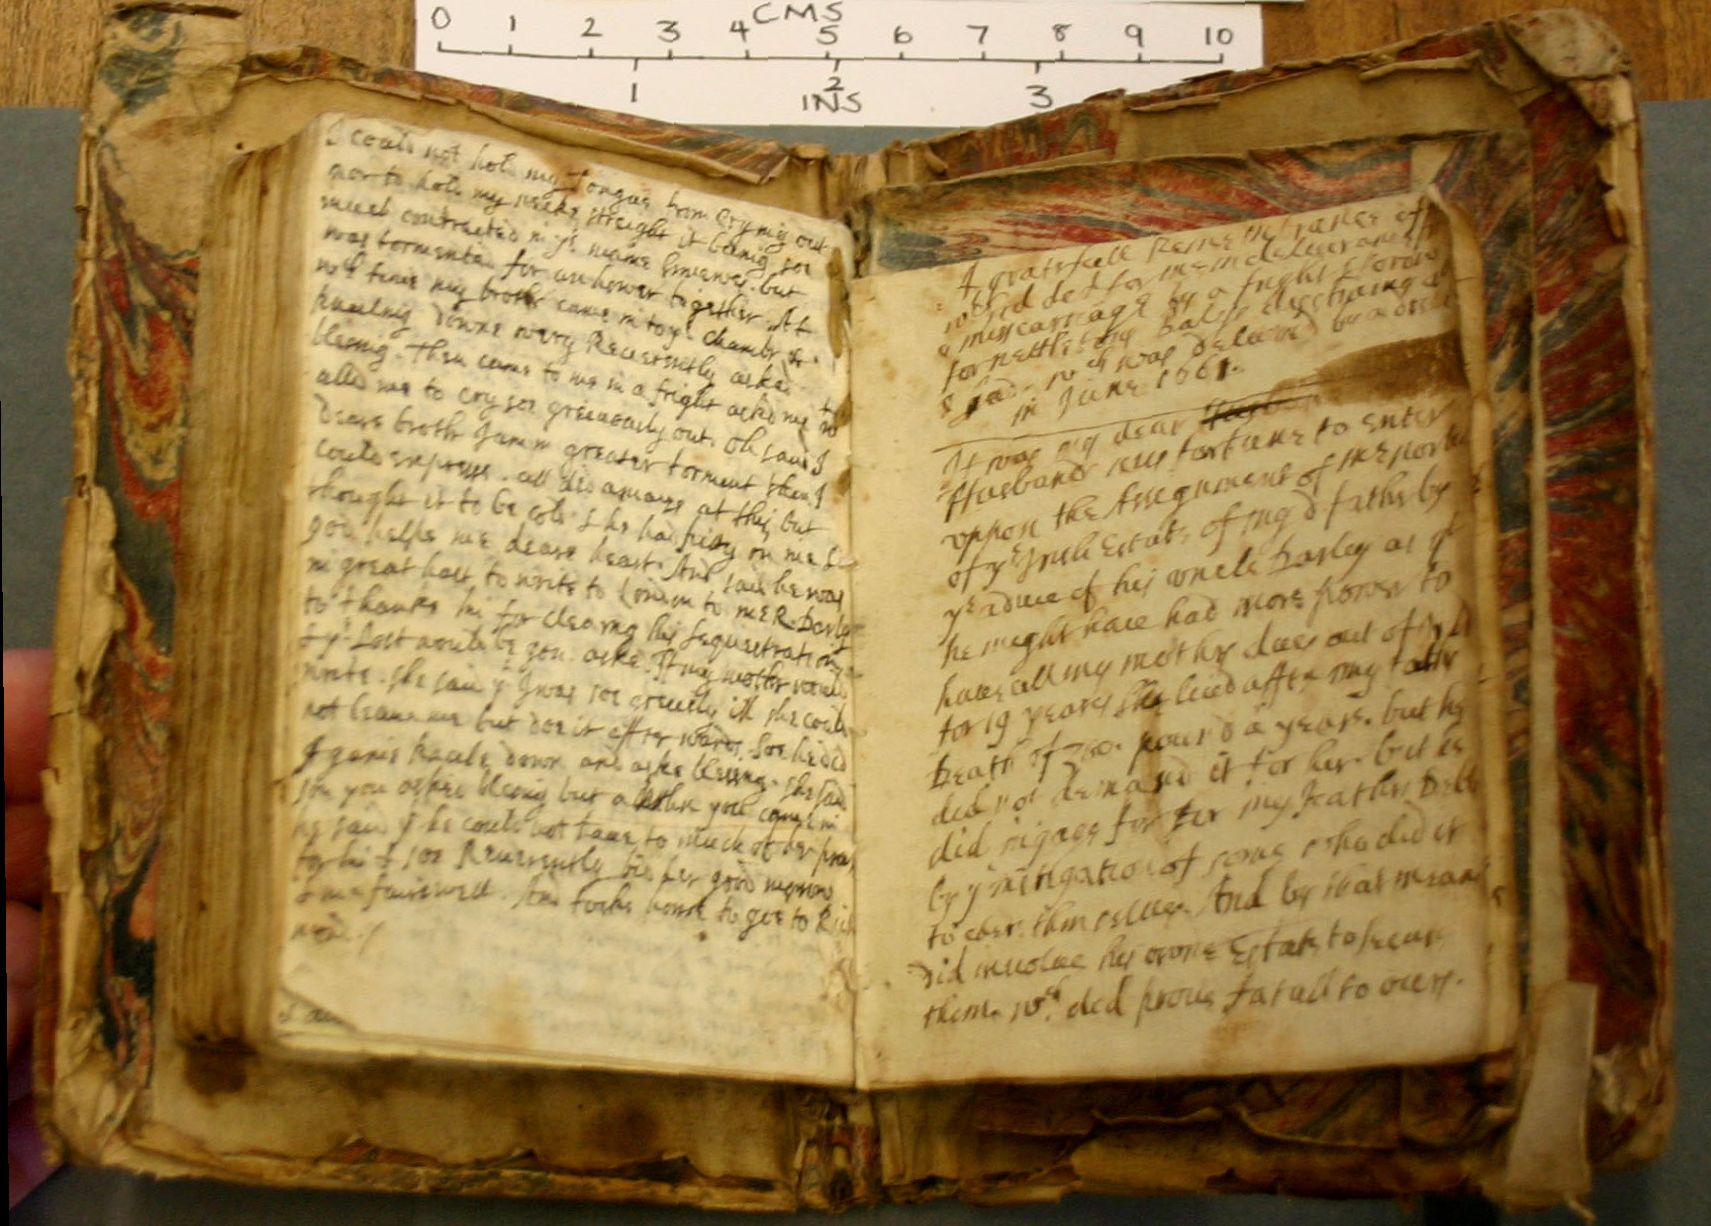 Finding Two Missing Thornton Manuscripts